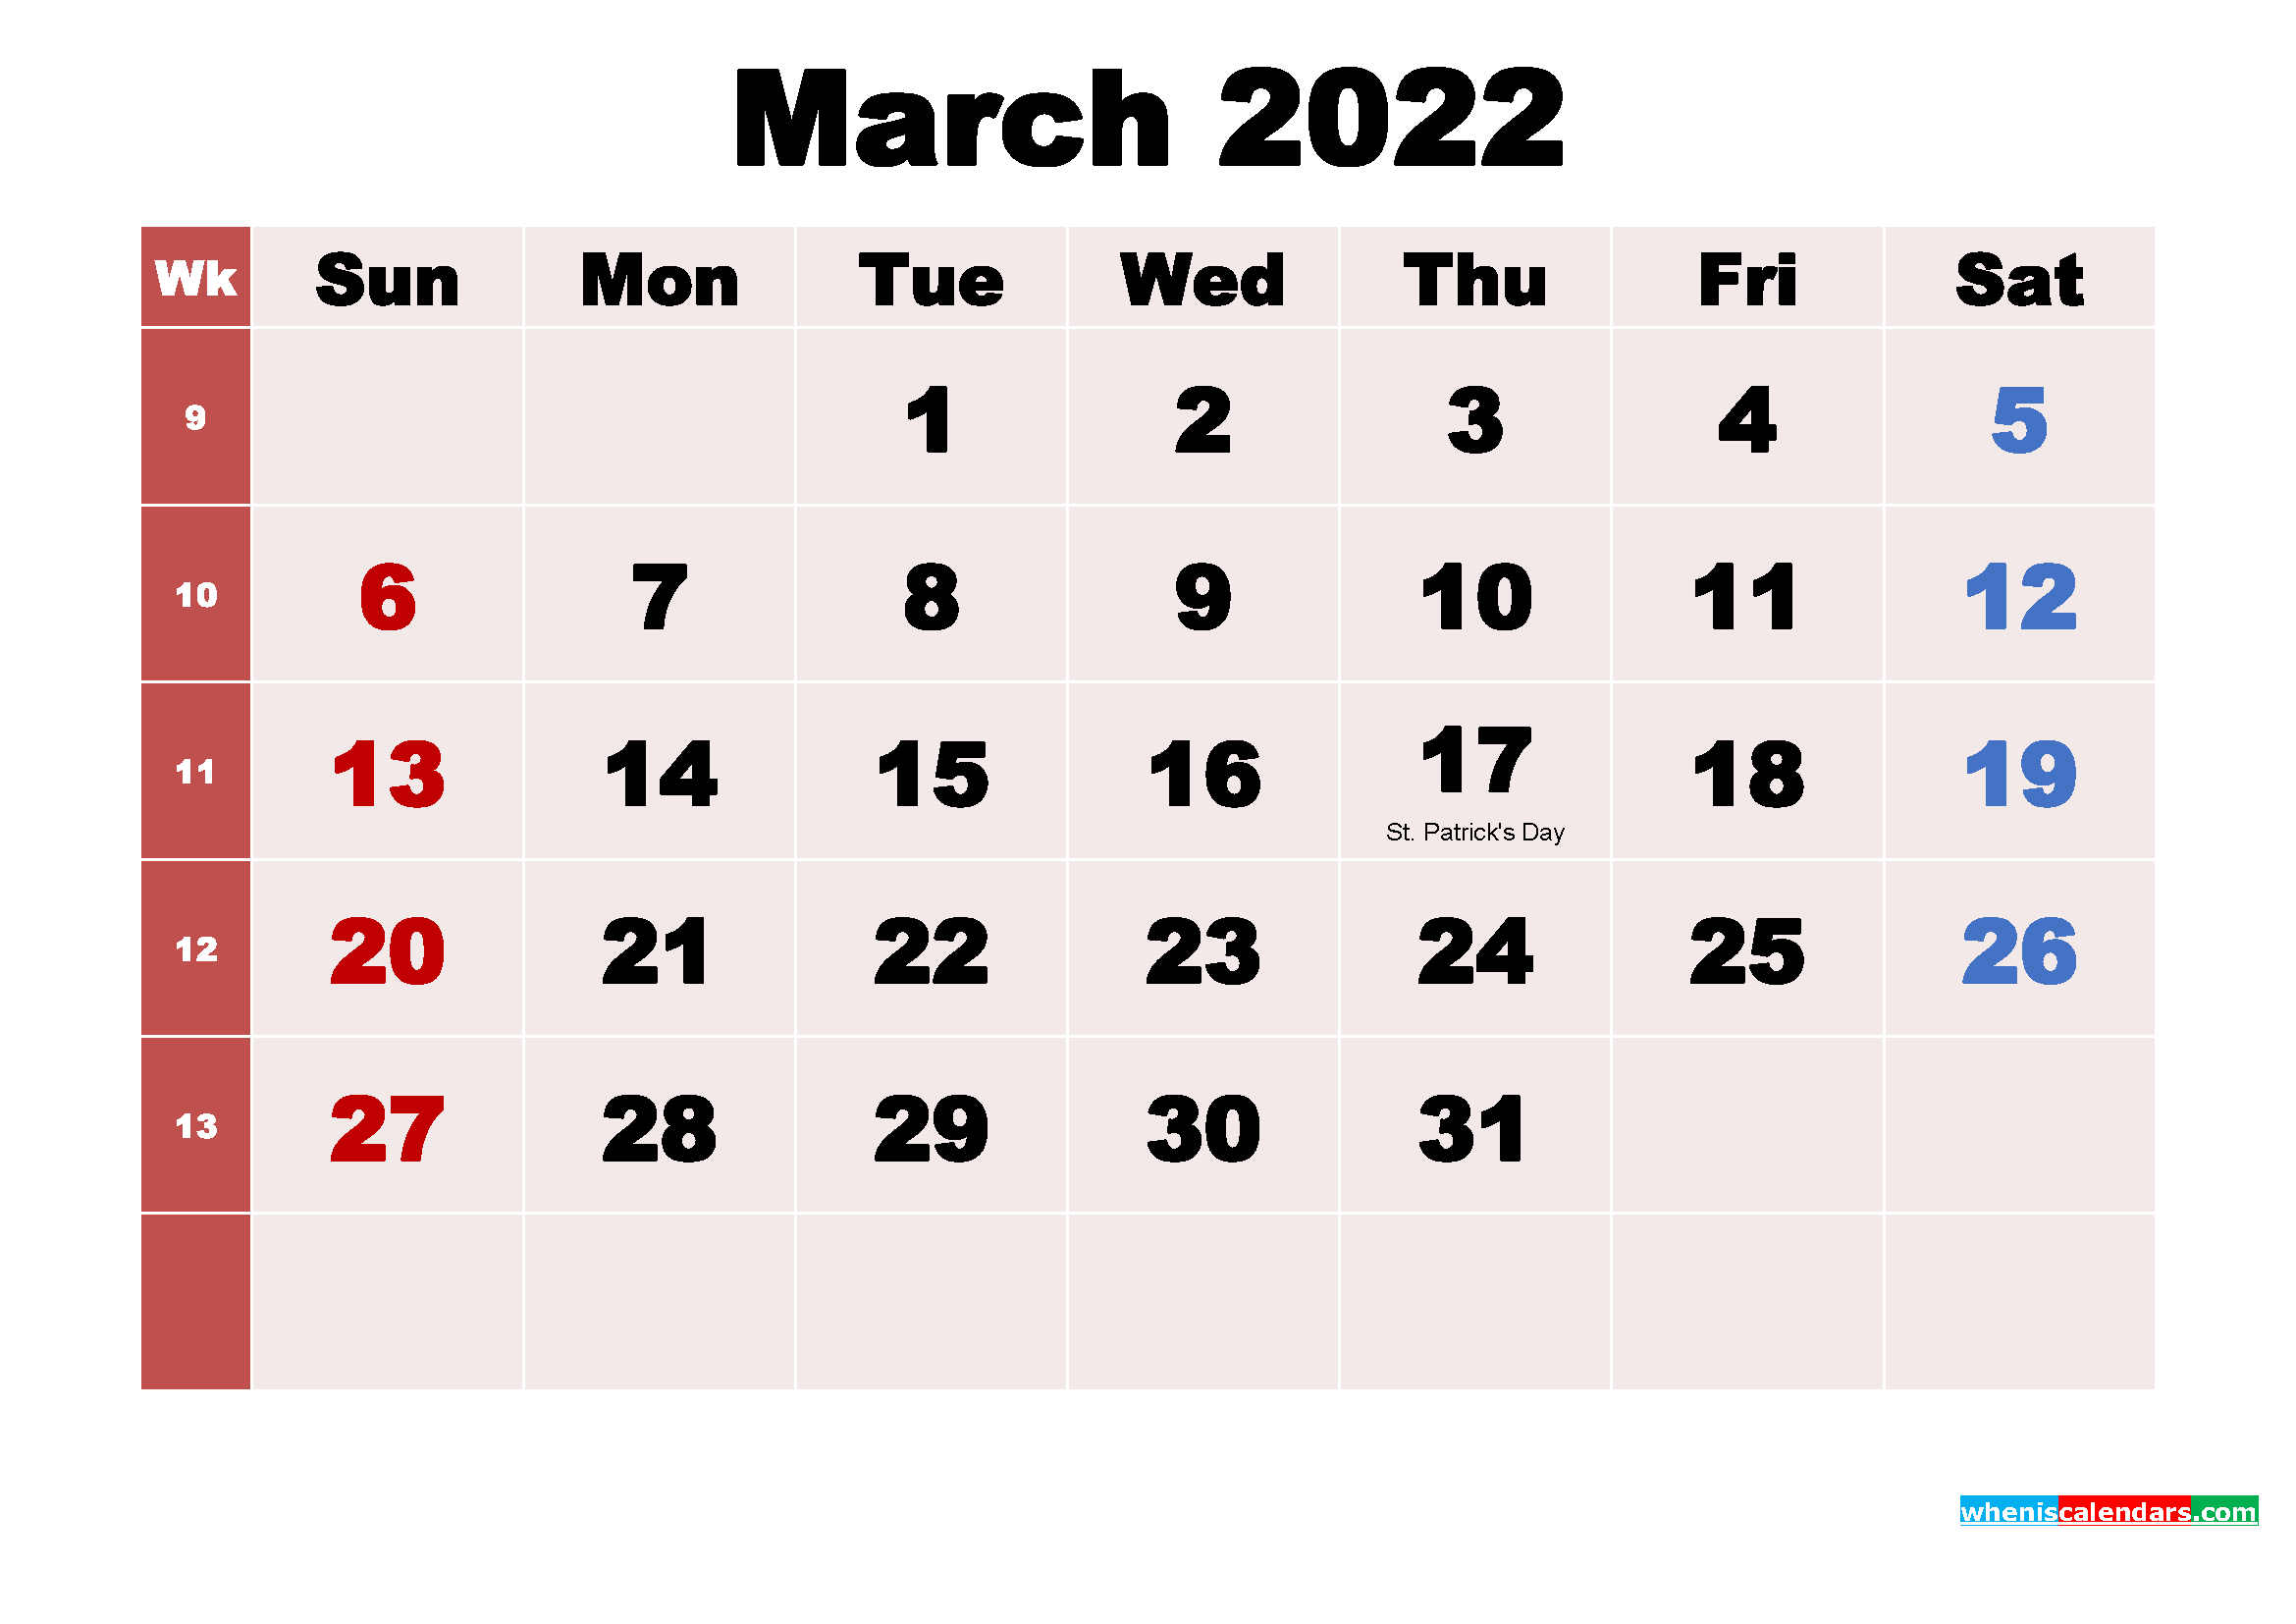 March 2022 Holiday Calendar Free Printable March 2022 Calendar With Holidays As Word, Pdf